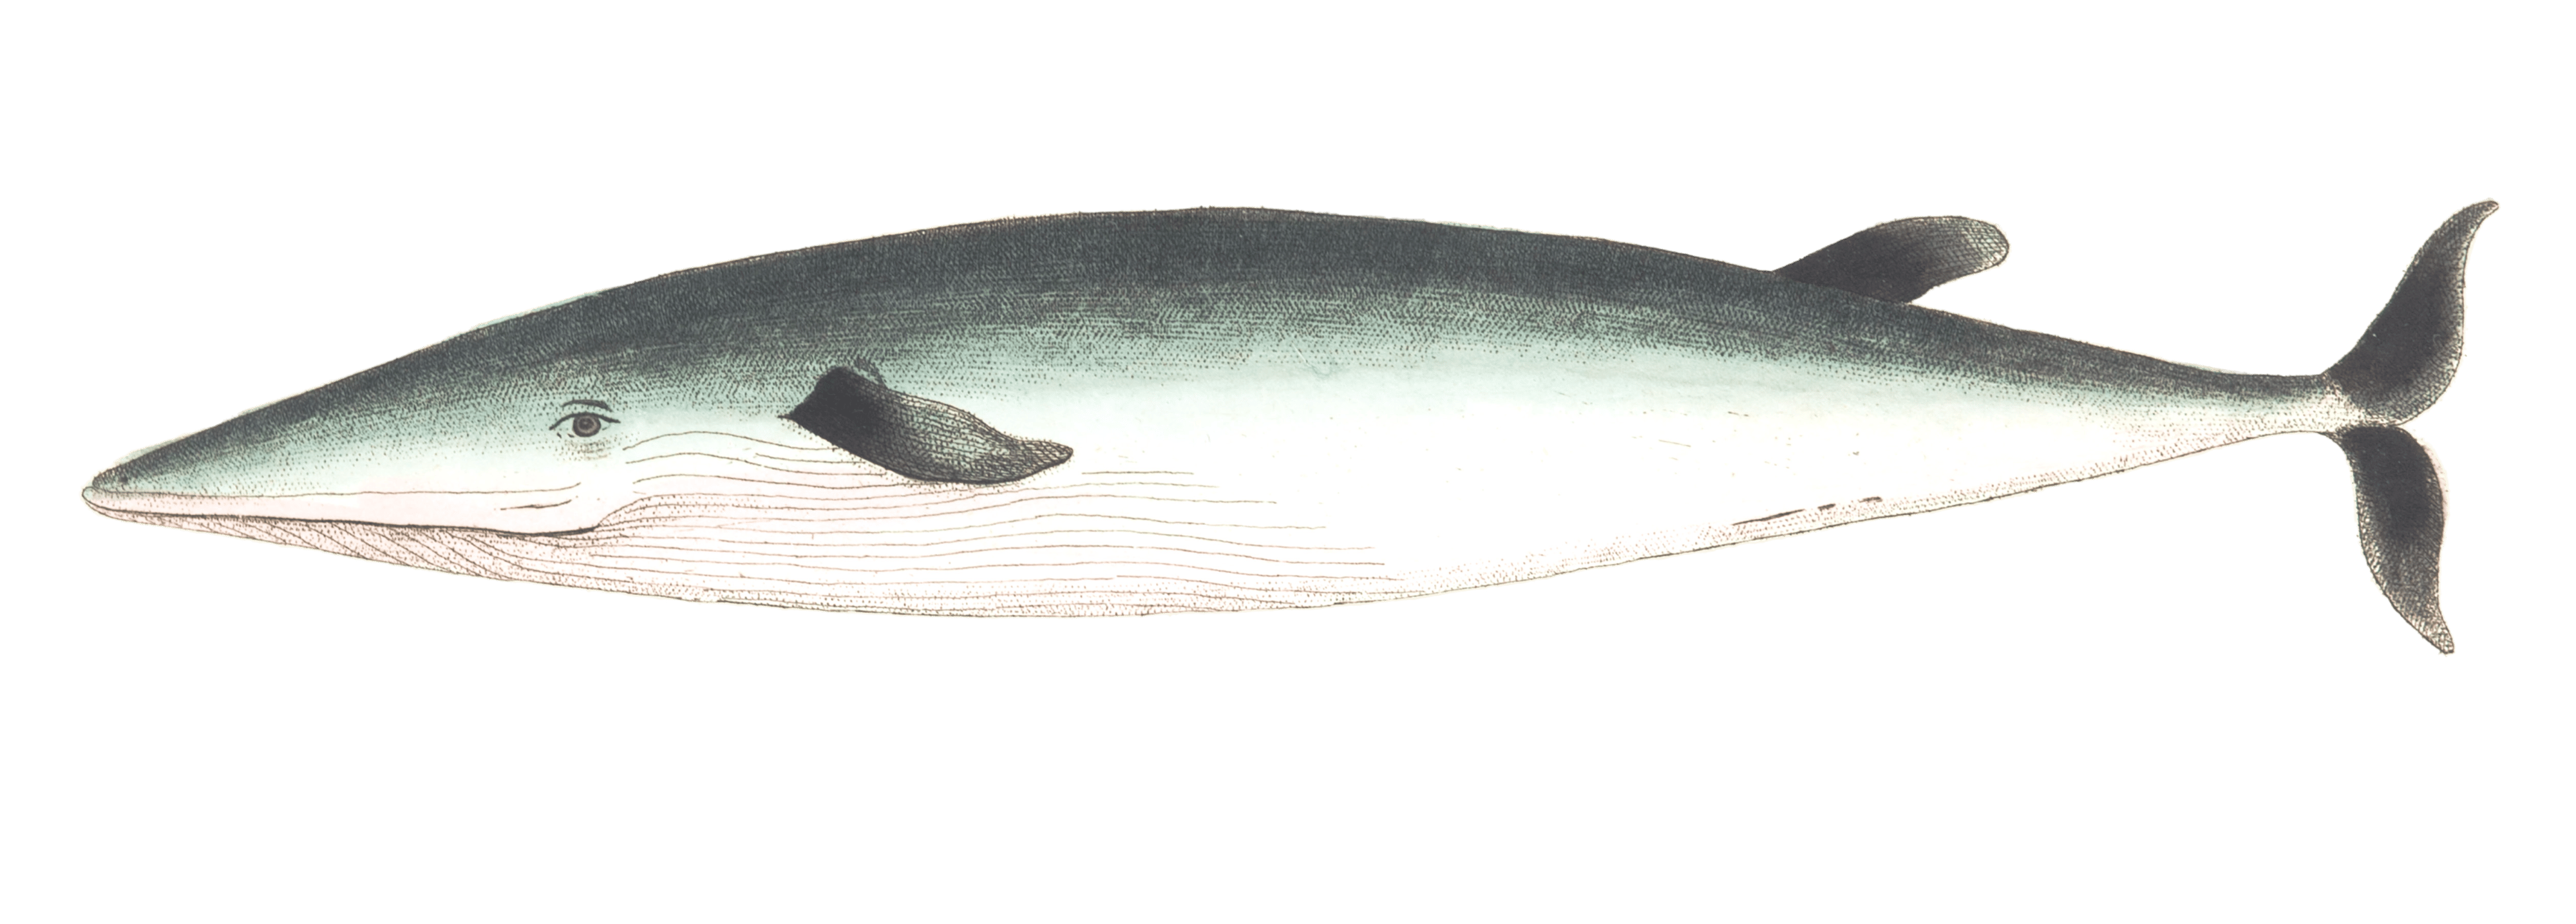 Rostrated-Whale-Vintage-Illustration